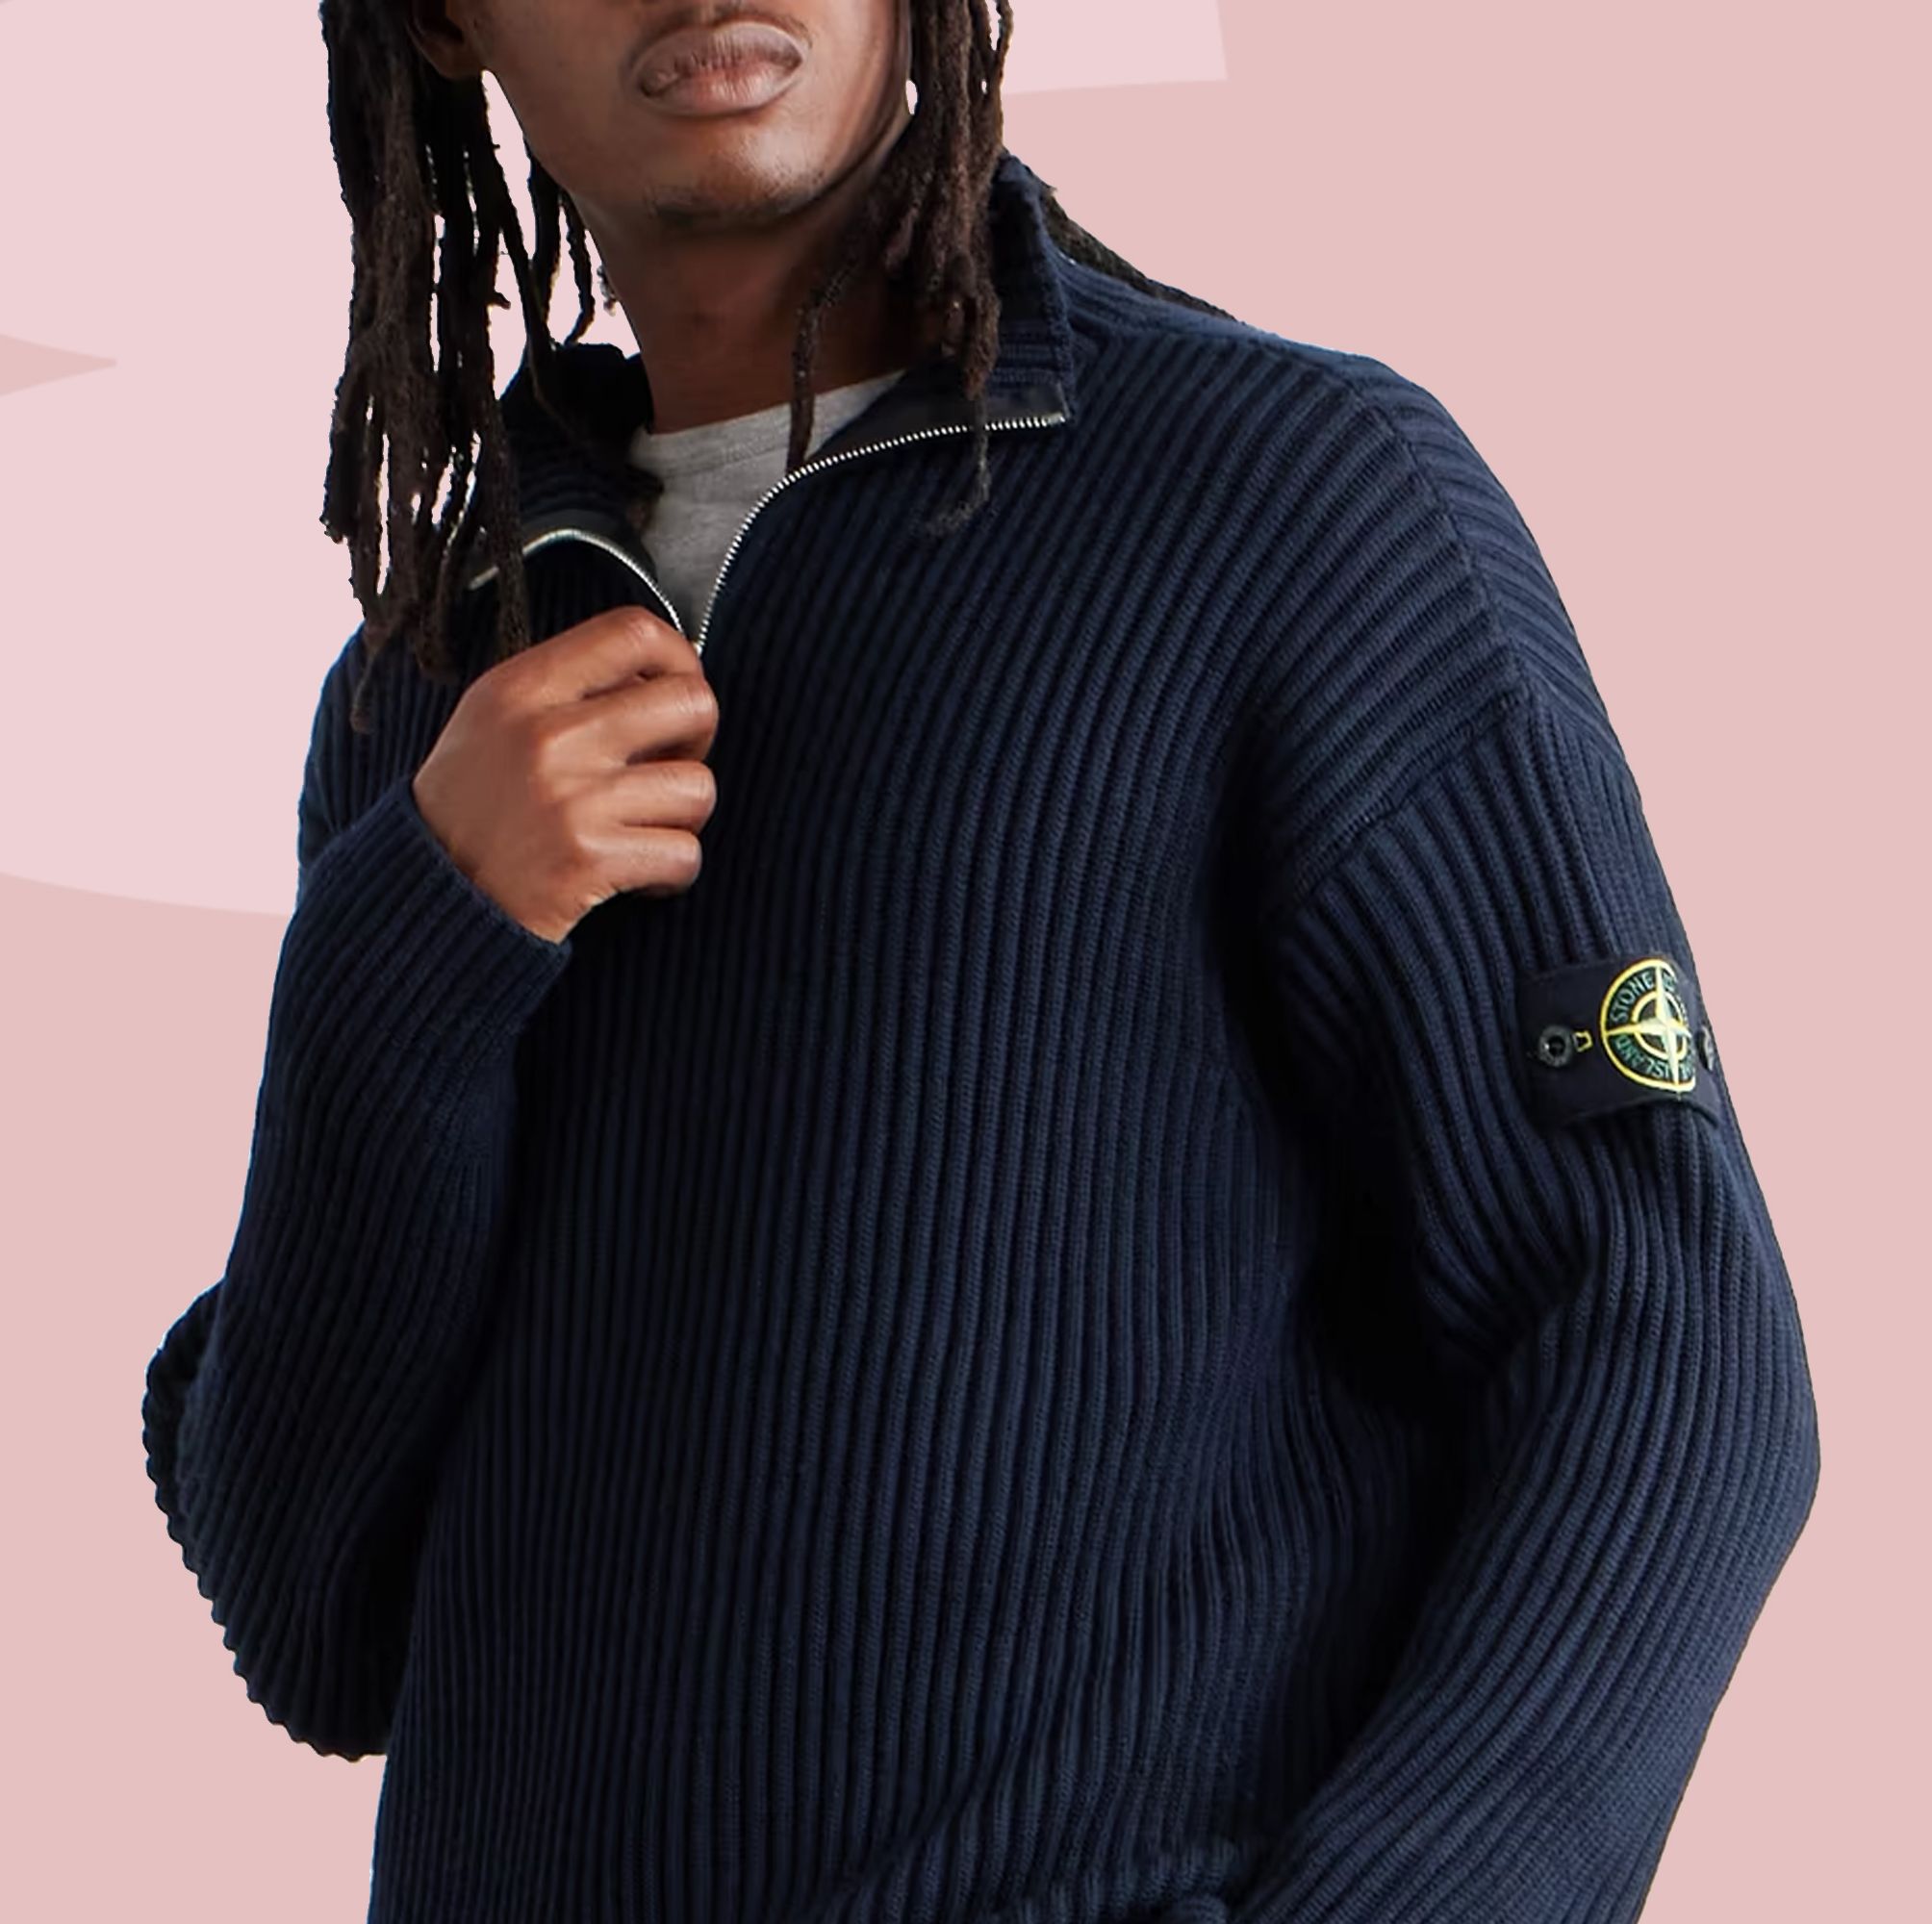 These Quarter Zip Sweaters Are Cozy, Classy, and Cool